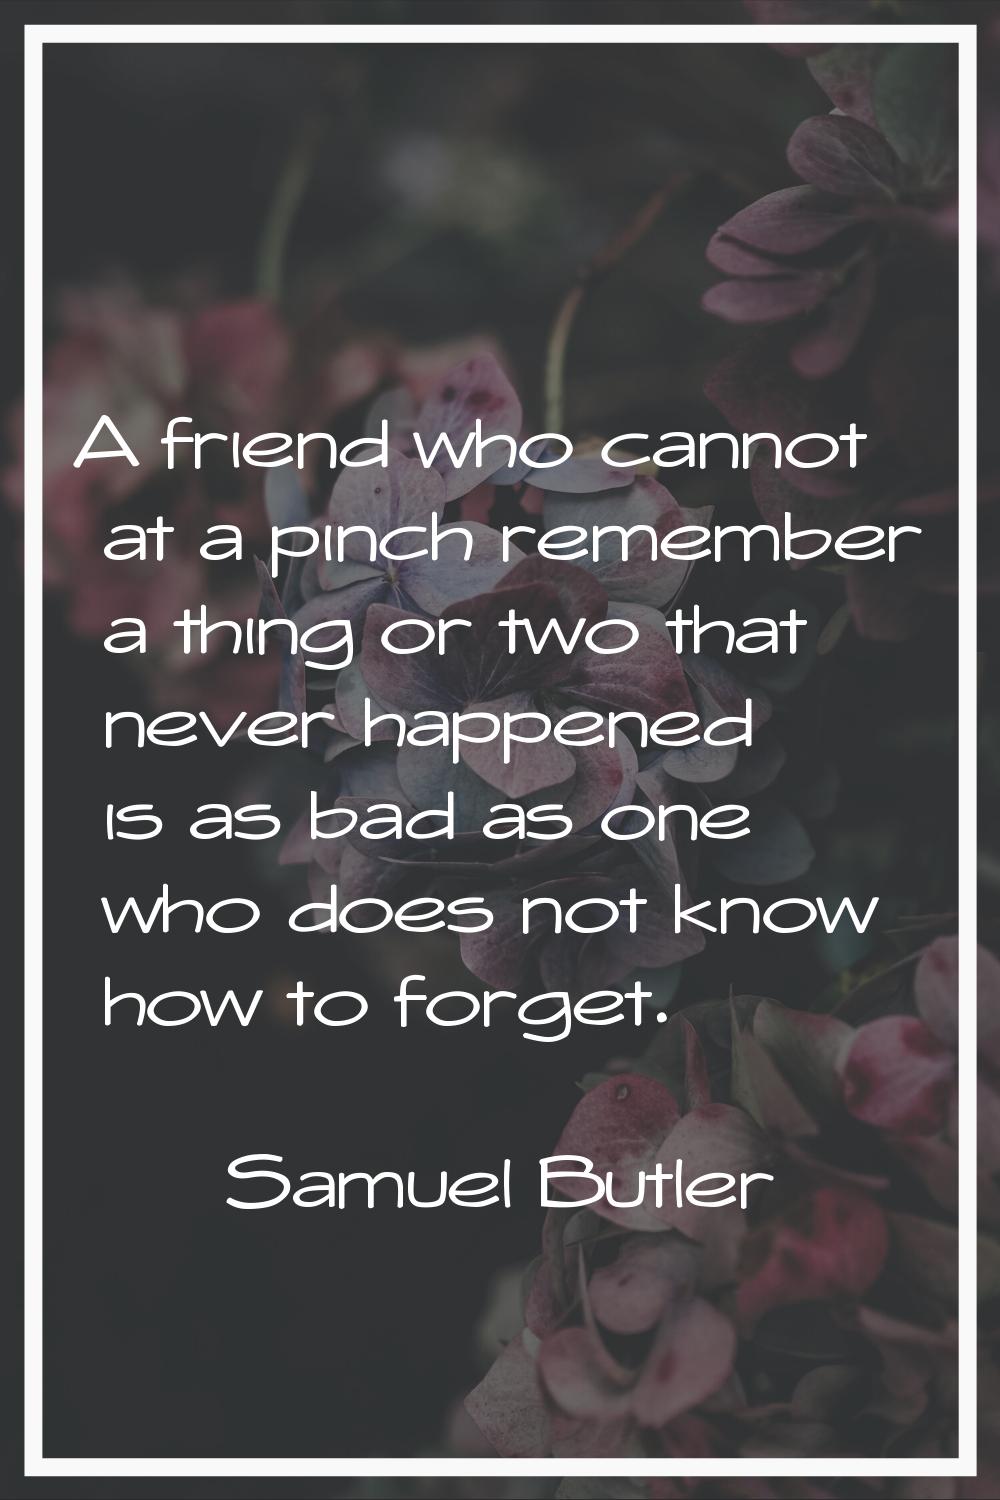 A friend who cannot at a pinch remember a thing or two that never happened is as bad as one who doe